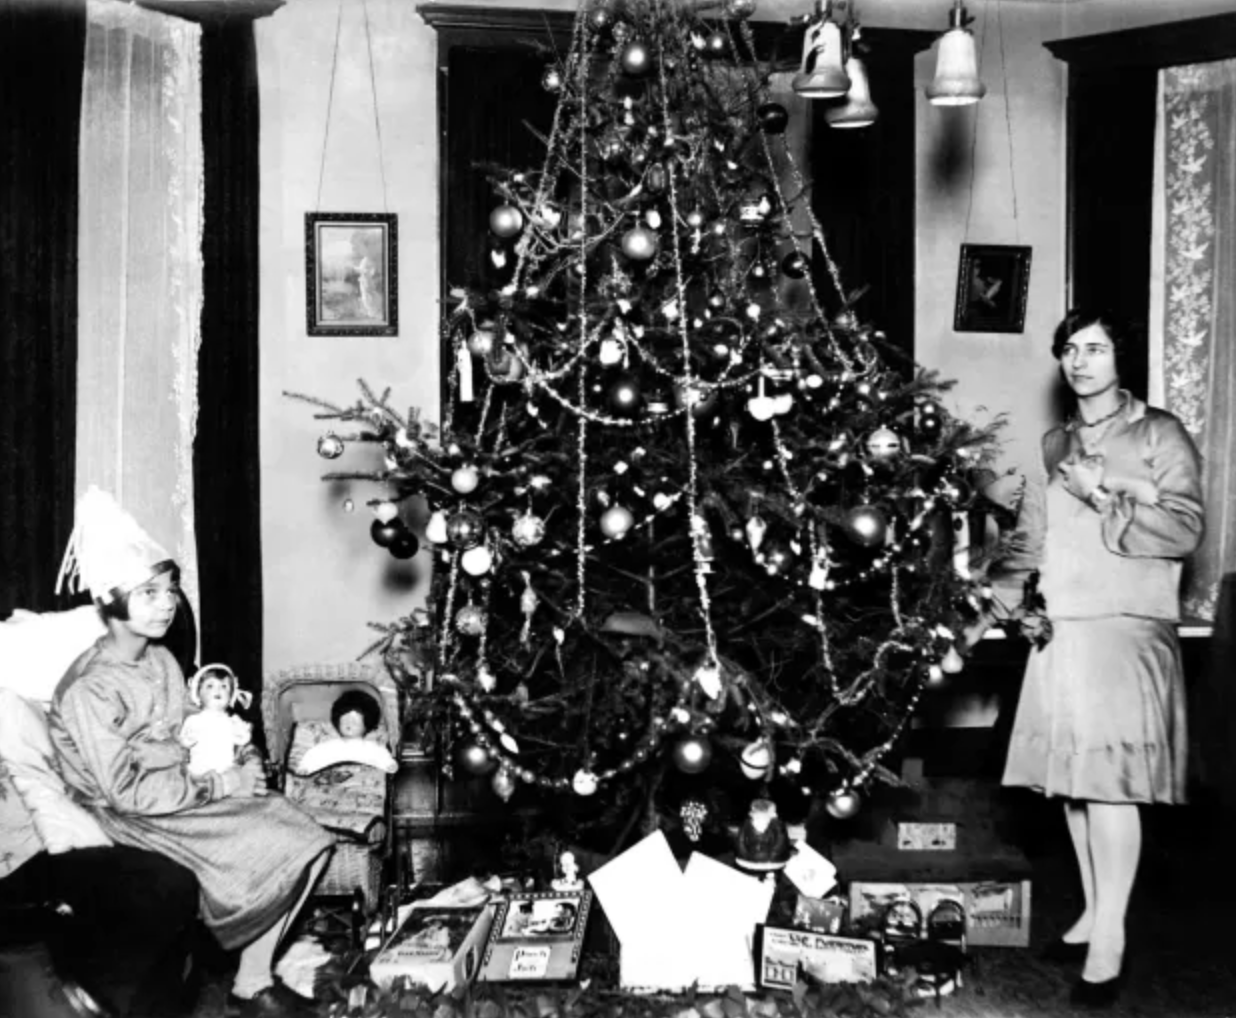 Two girls decorate a Christmas Tree with glass ornaments during the Art Deco era.